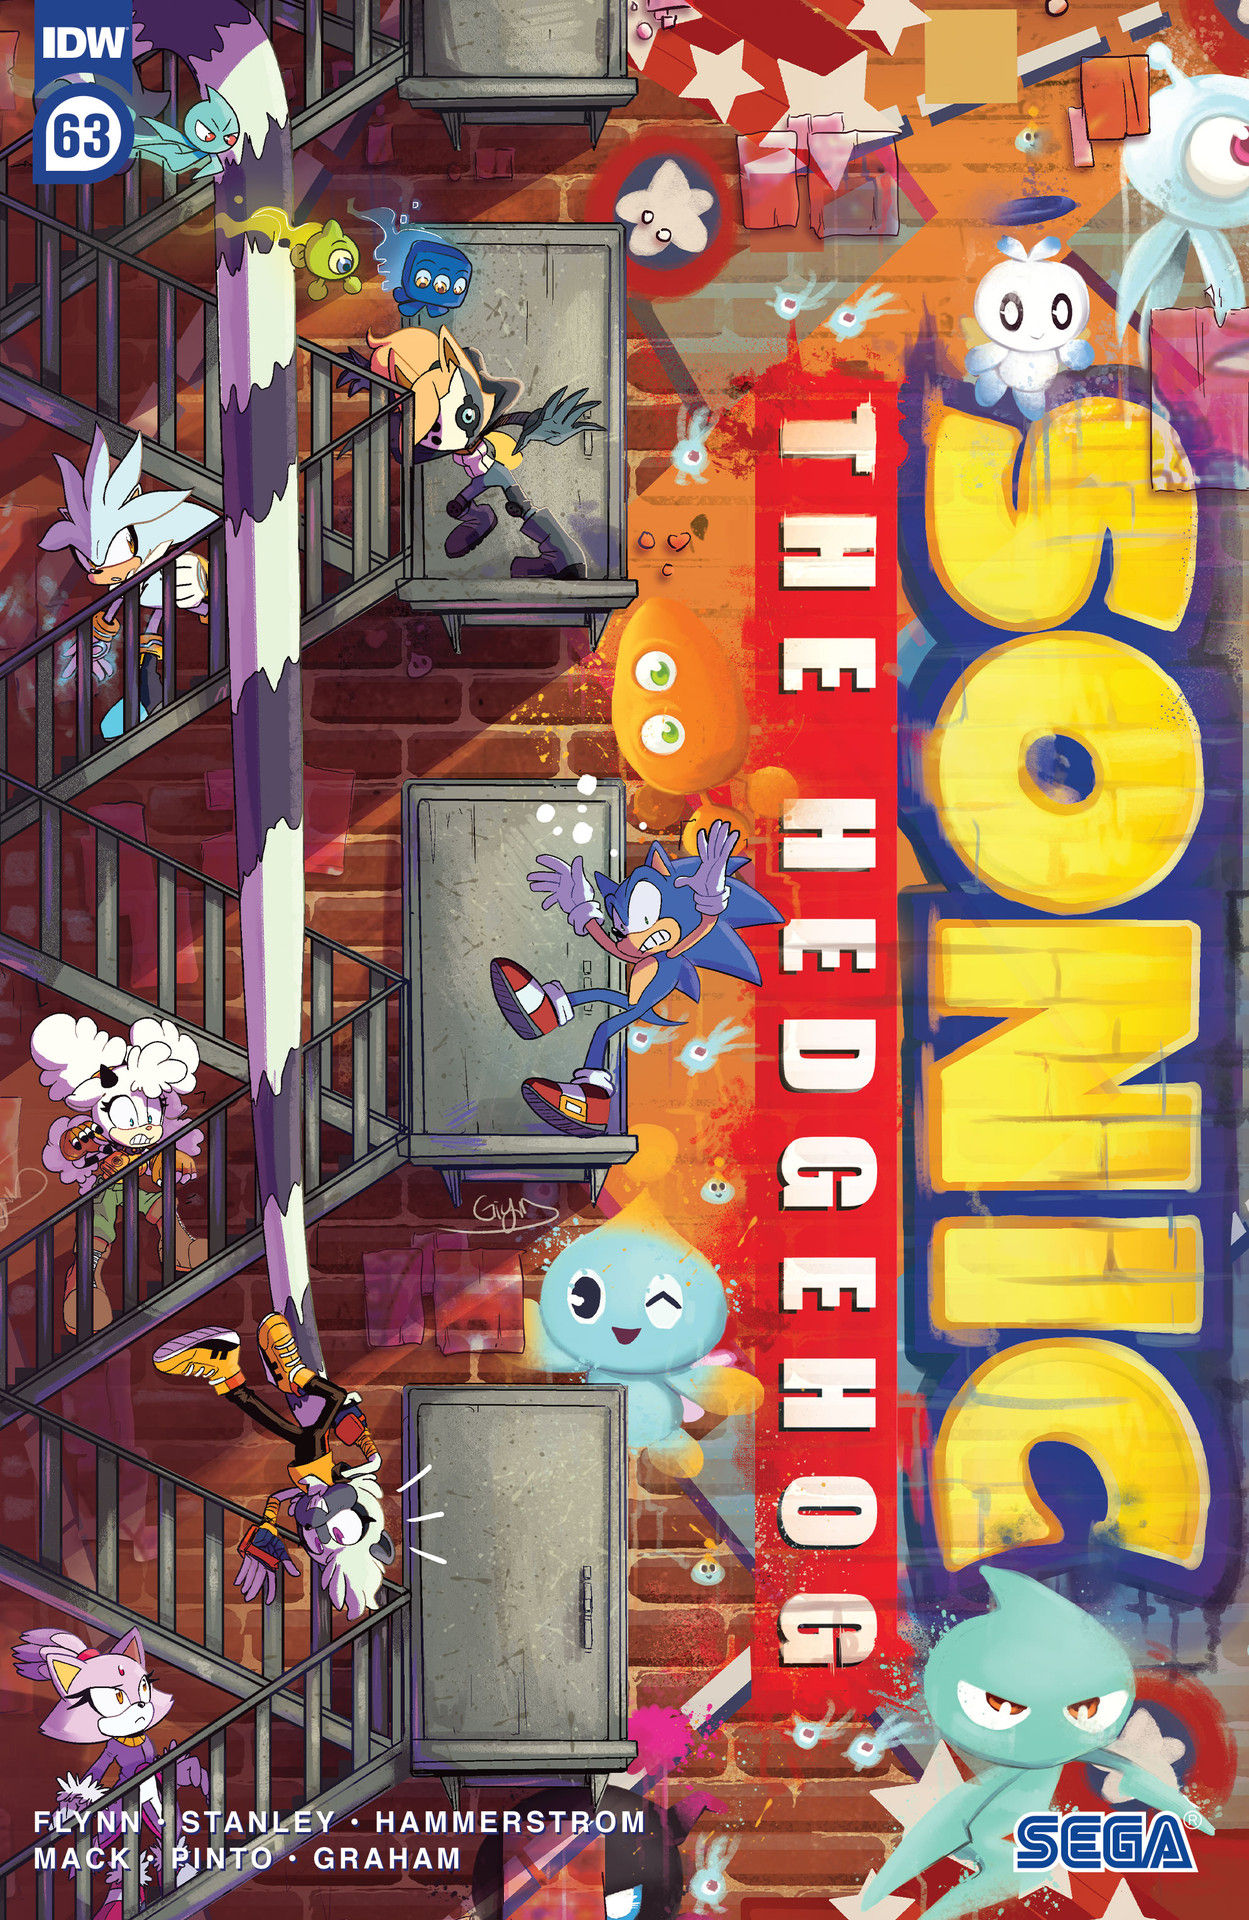 Sonic The Hedgehog IDW (#1-67) - Read Comic Online Sonic The